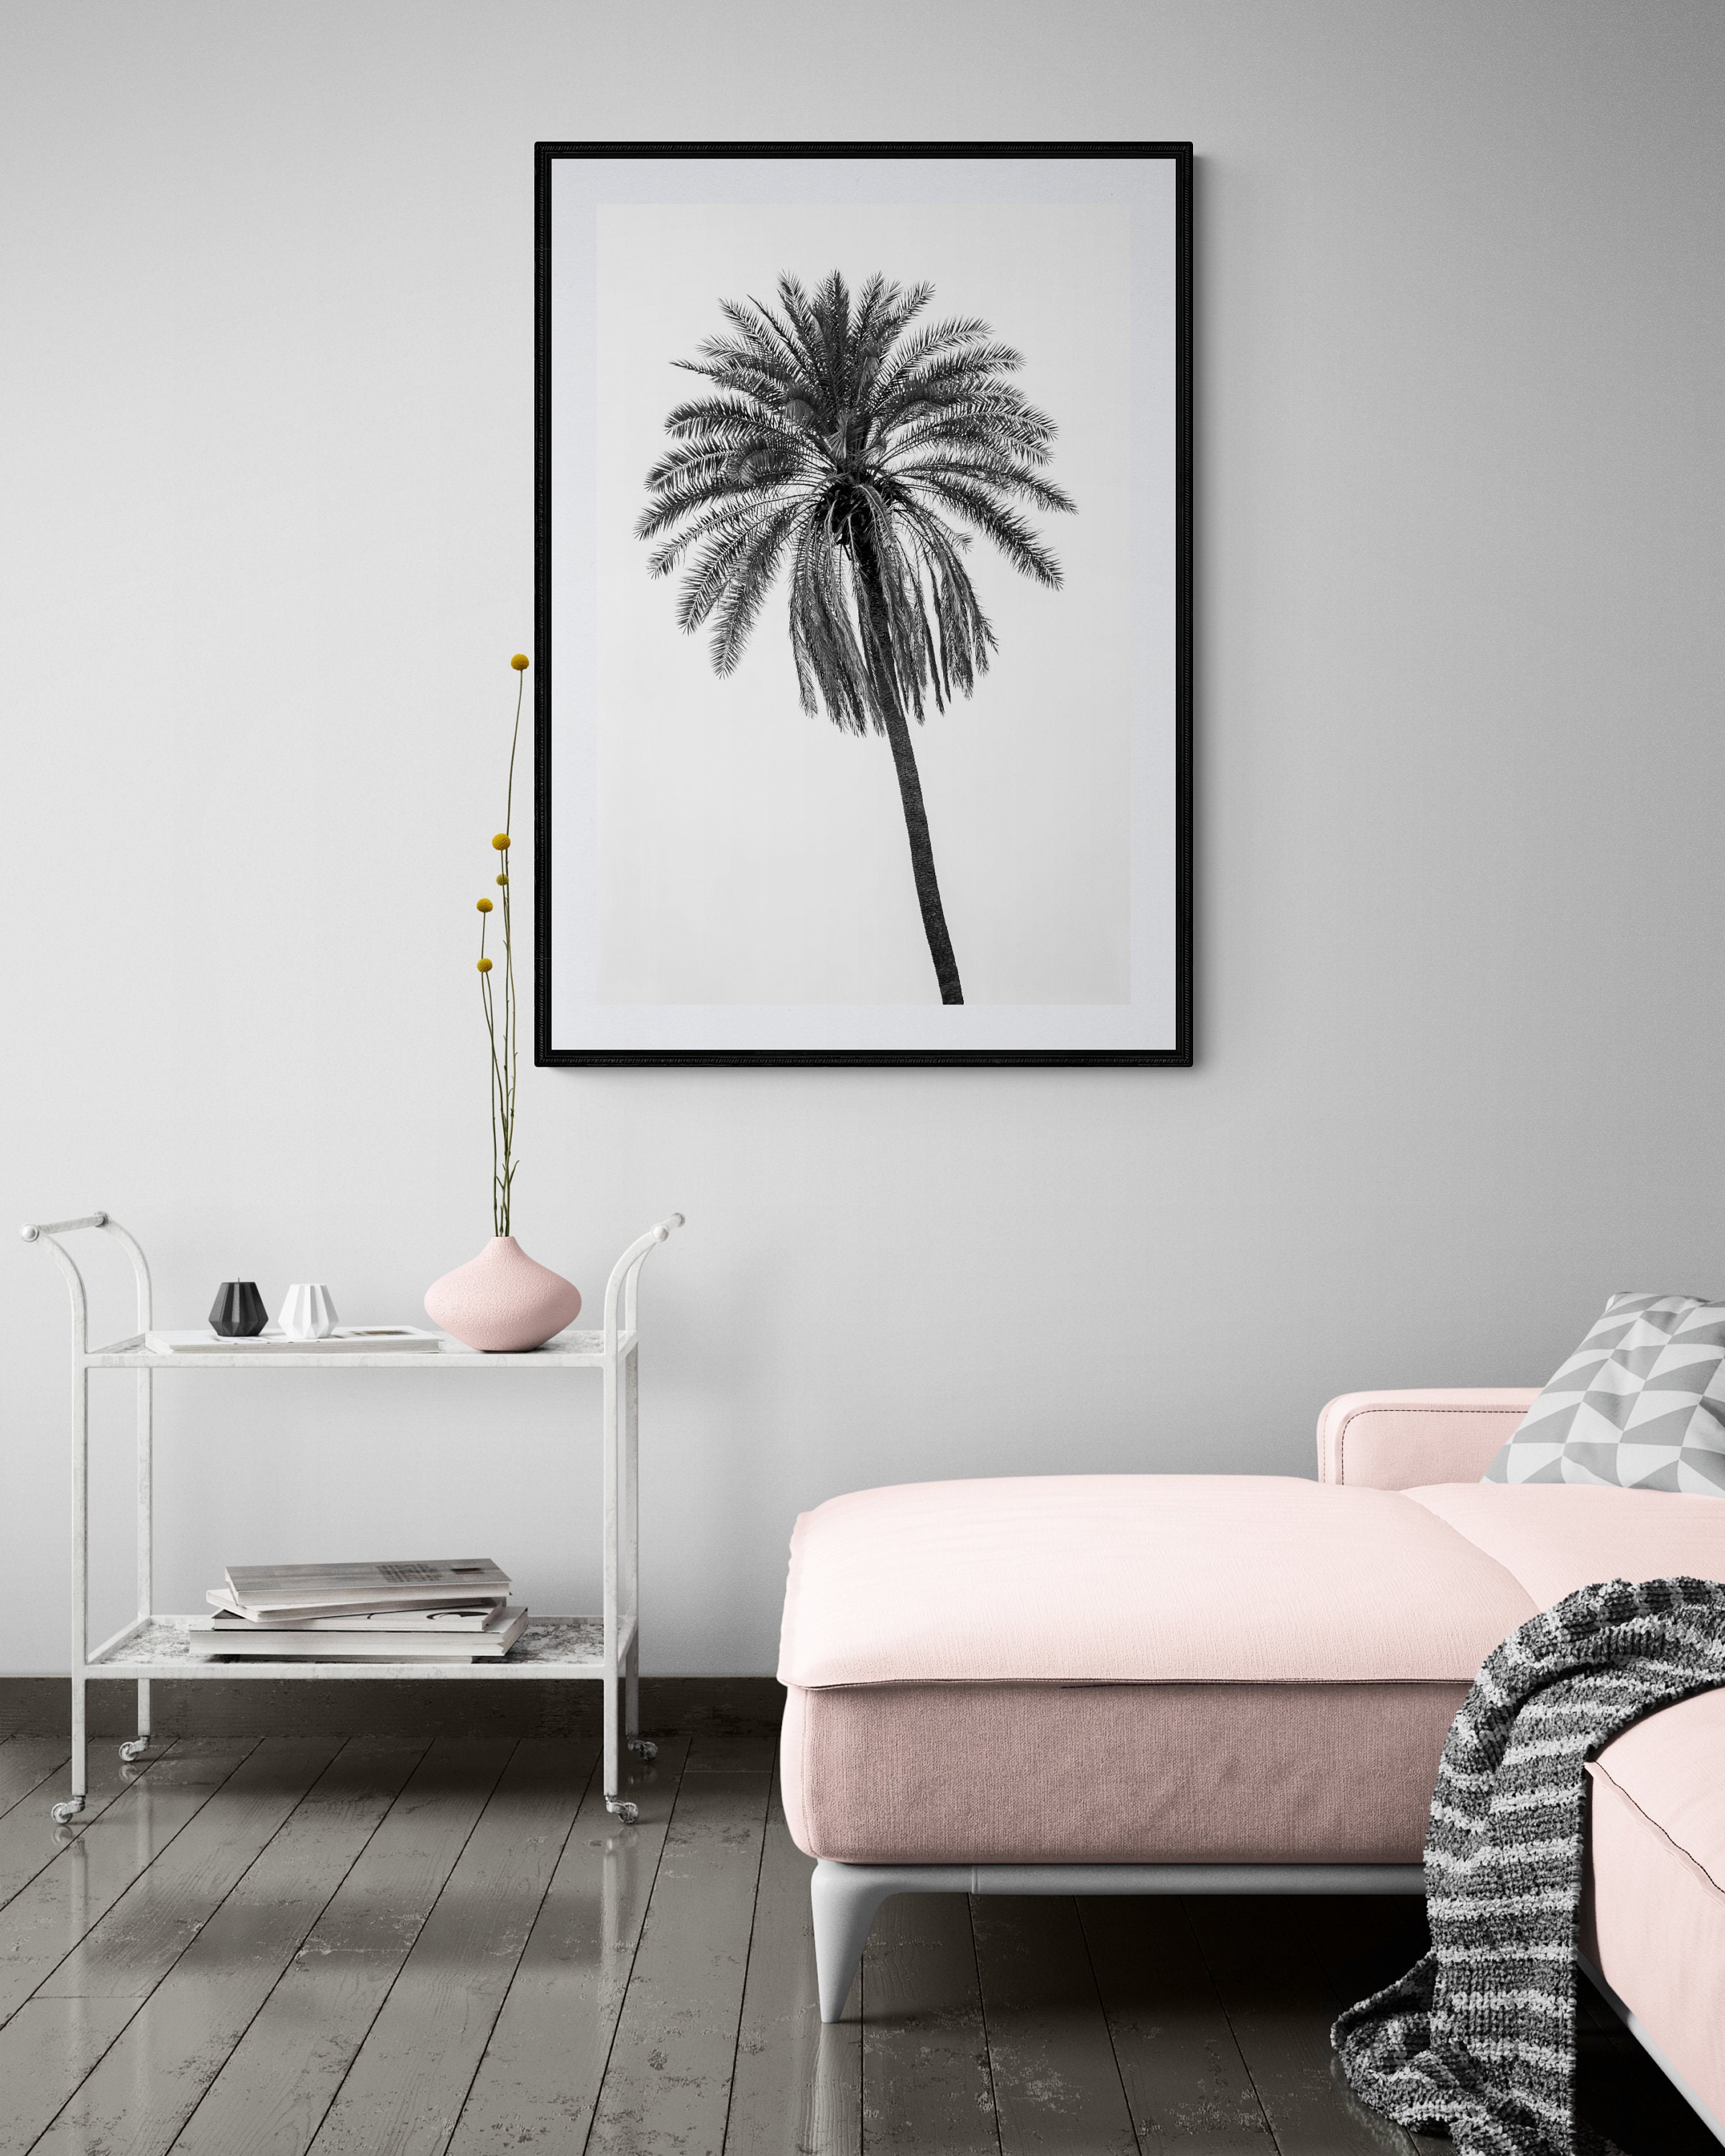 Minimalist Palm Tree vertical beach decor fine art photo Housewarming Gift Black And White wall art over the bed metal print canvas poster